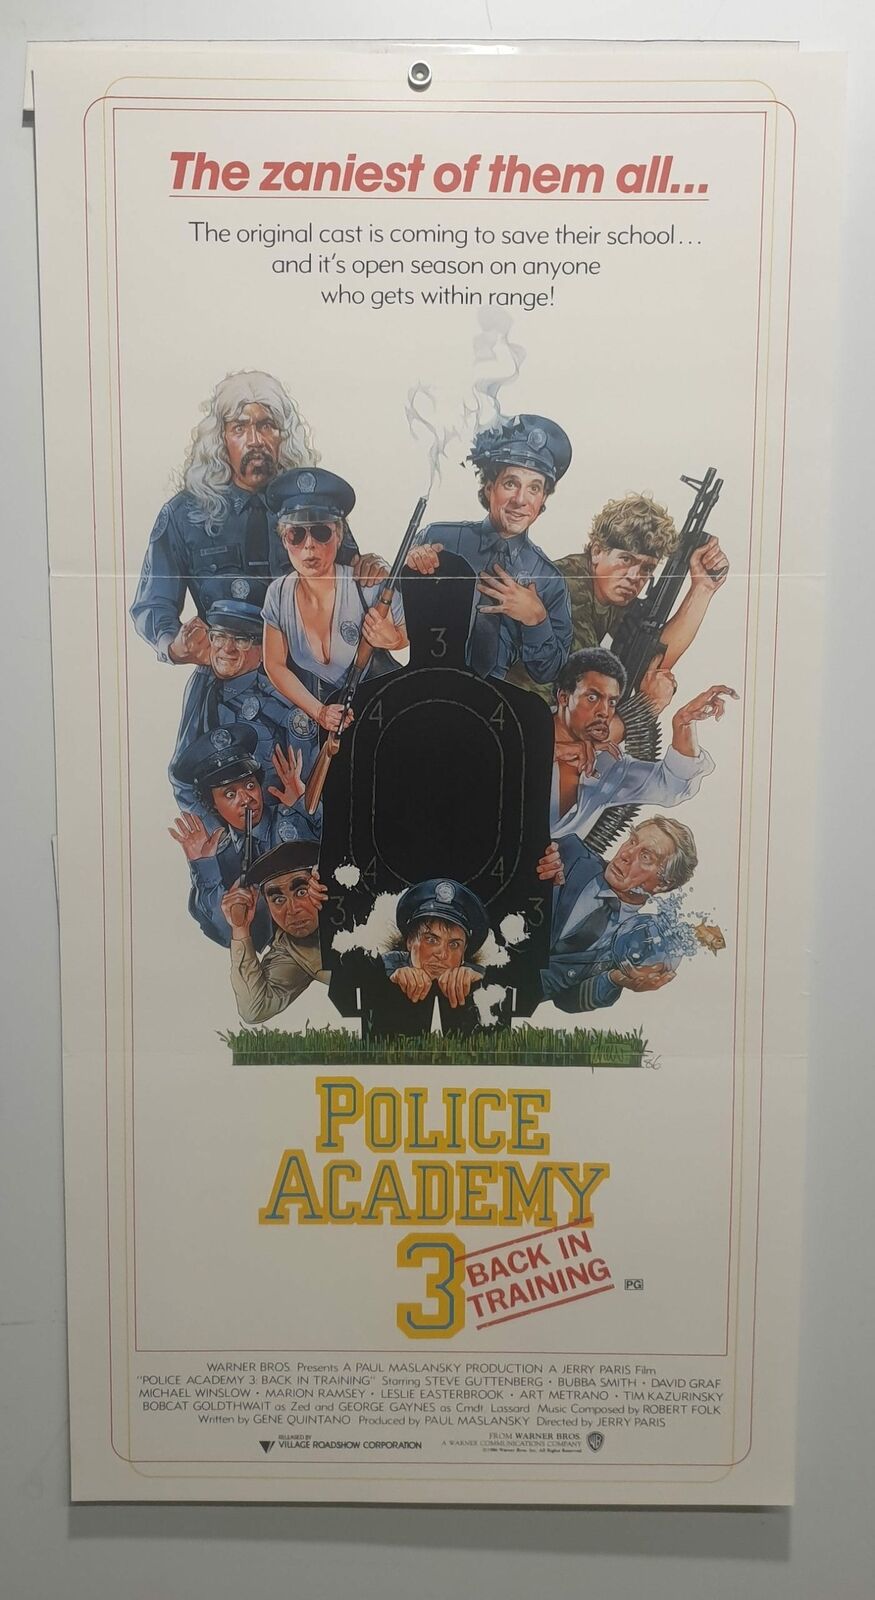 ORIGINAL DAYBILL MOVIE POSTER - POLICE ACADEMY 3 - 1986 - BACK IN TRAINING